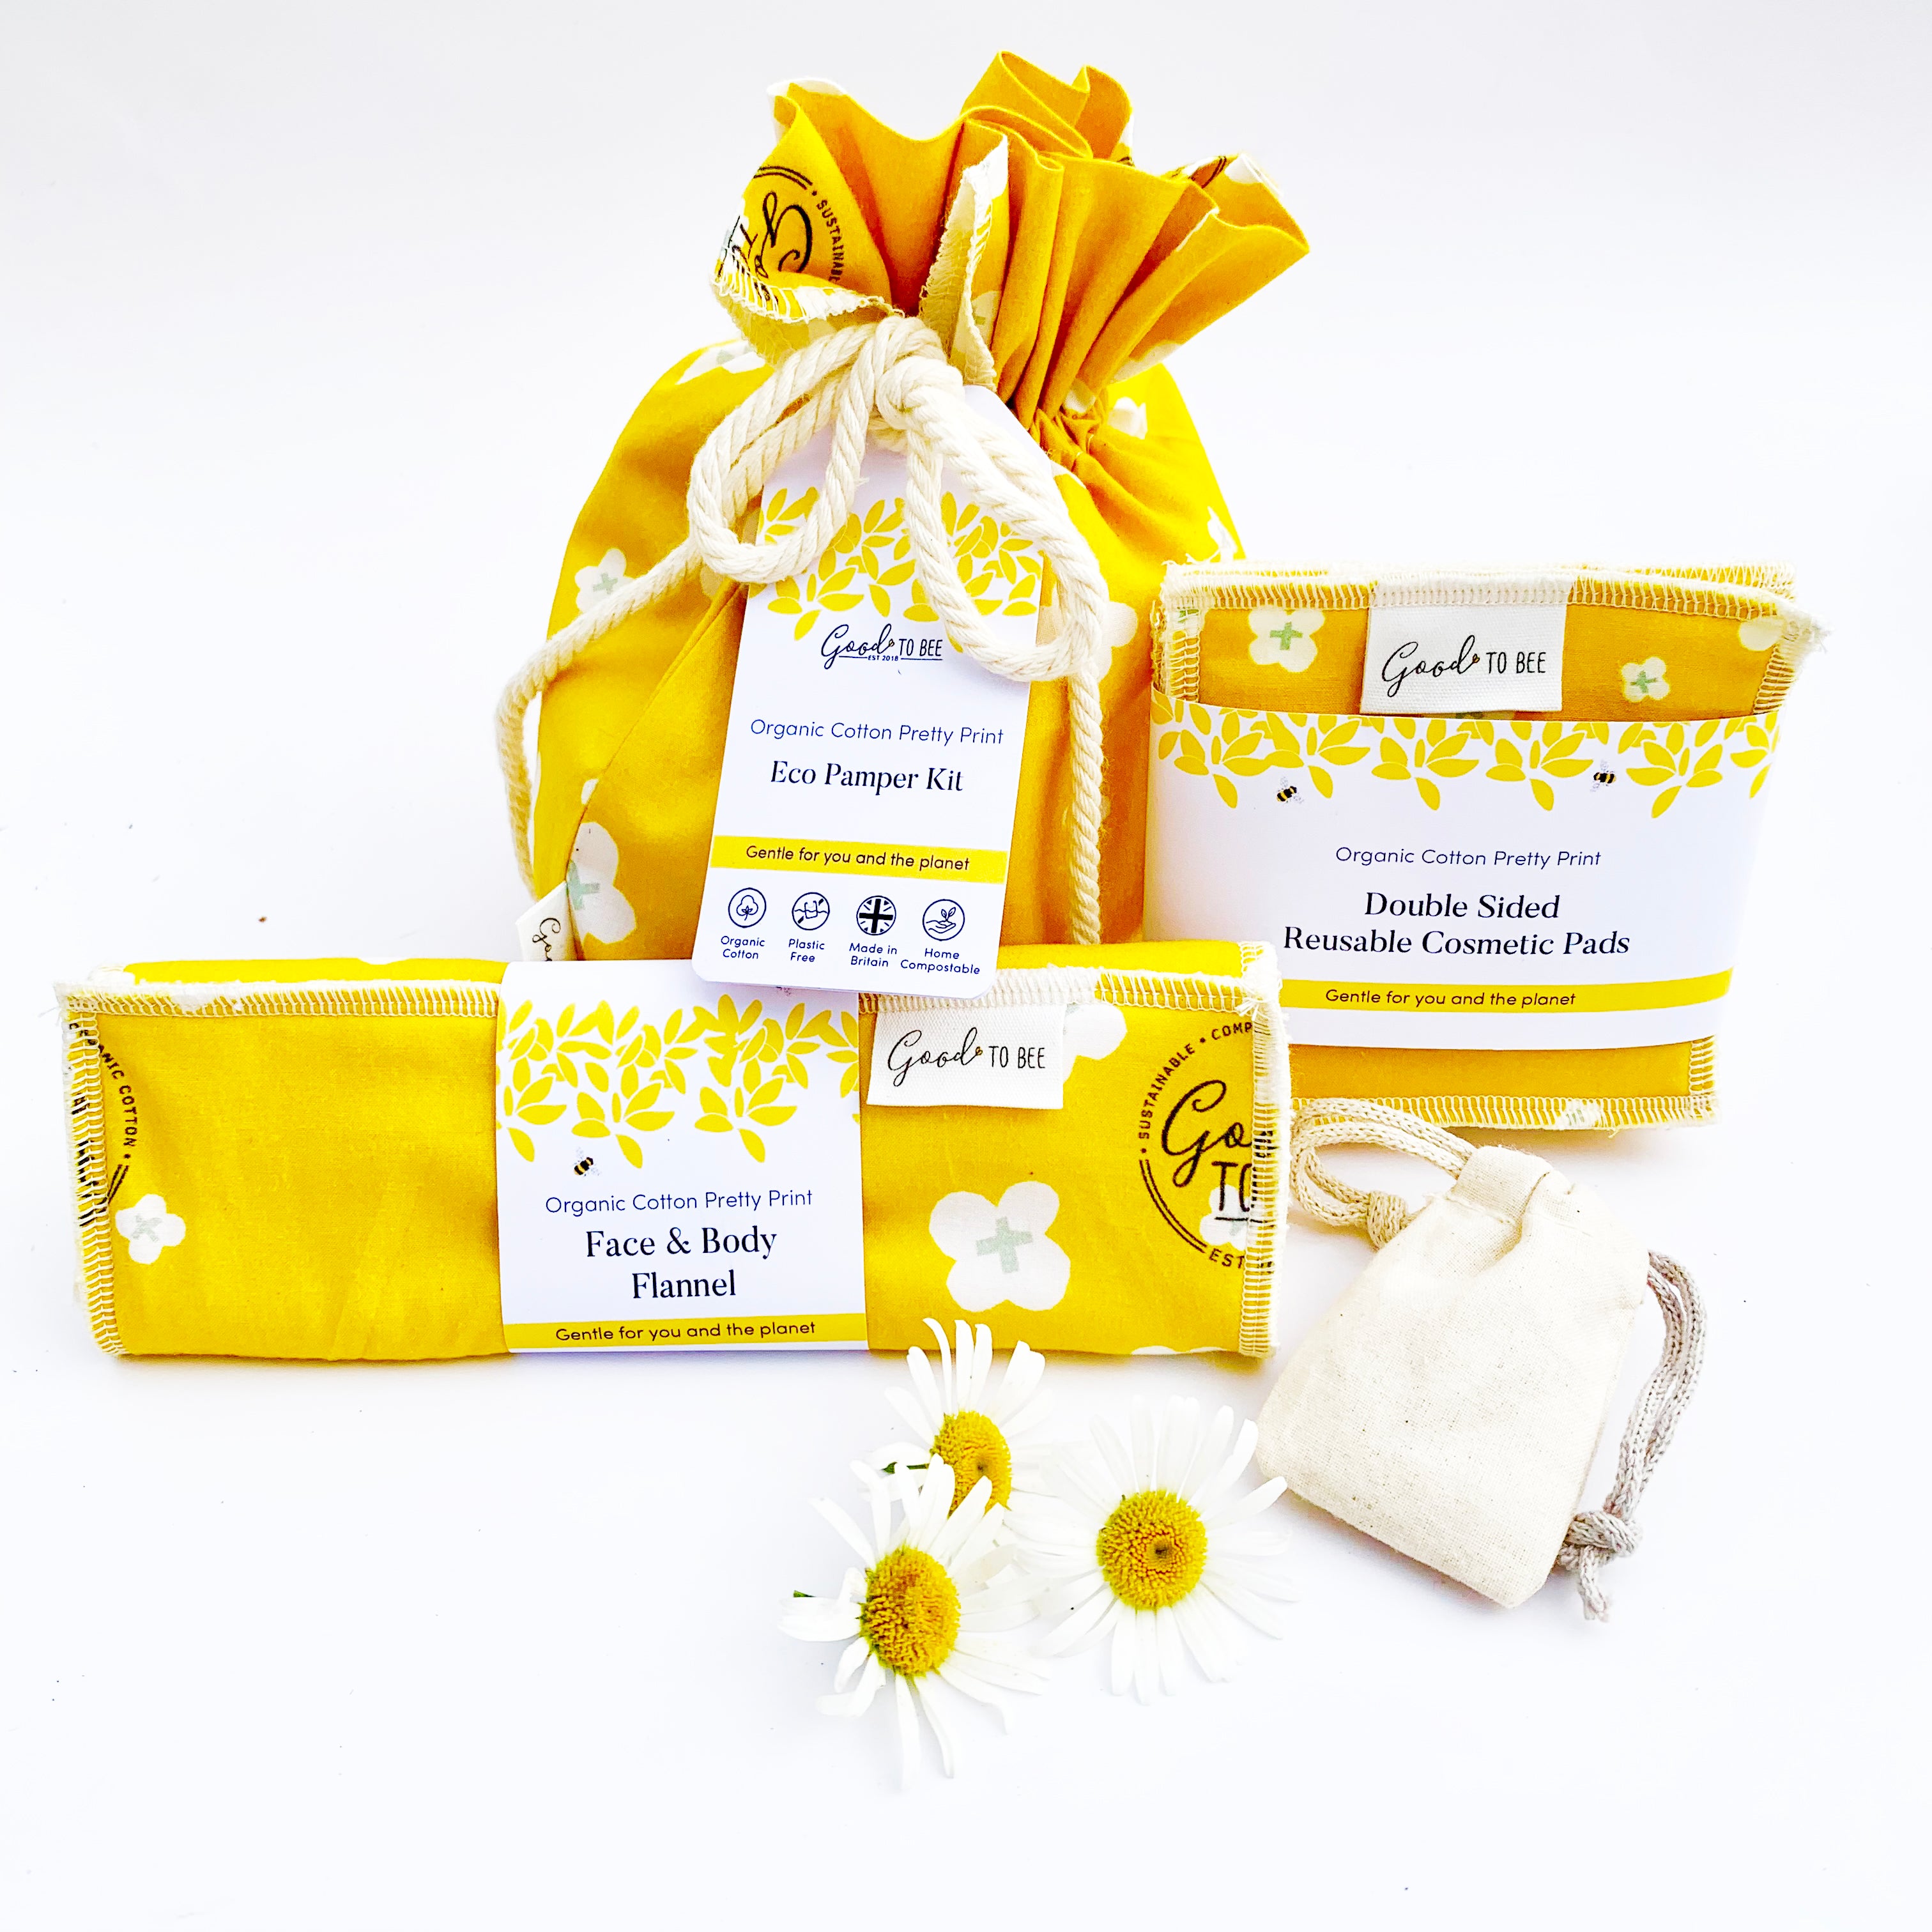 An image of Pretty Print Pamper Gift Kit